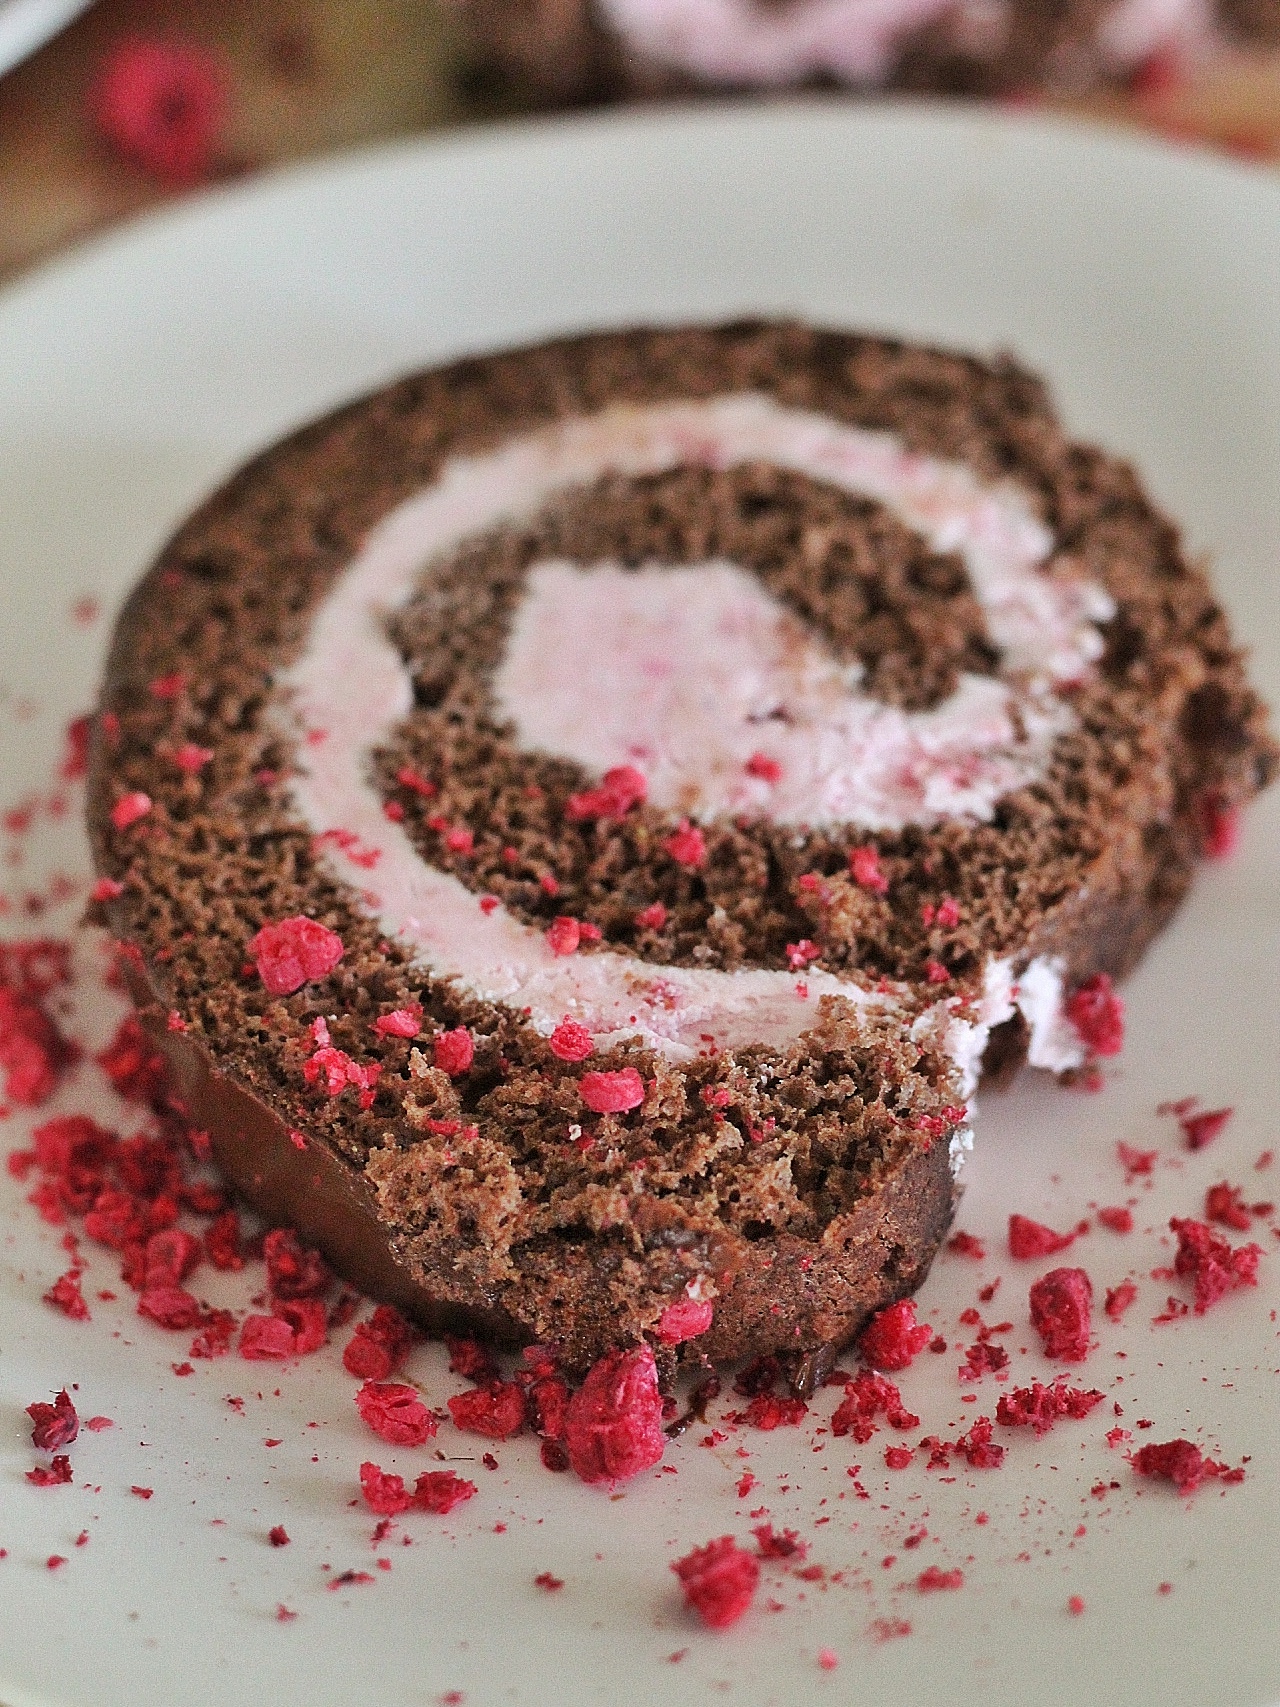 delicious recipe for a chocolate swiss roll with raspberry filling. www.cakebycourtney.com